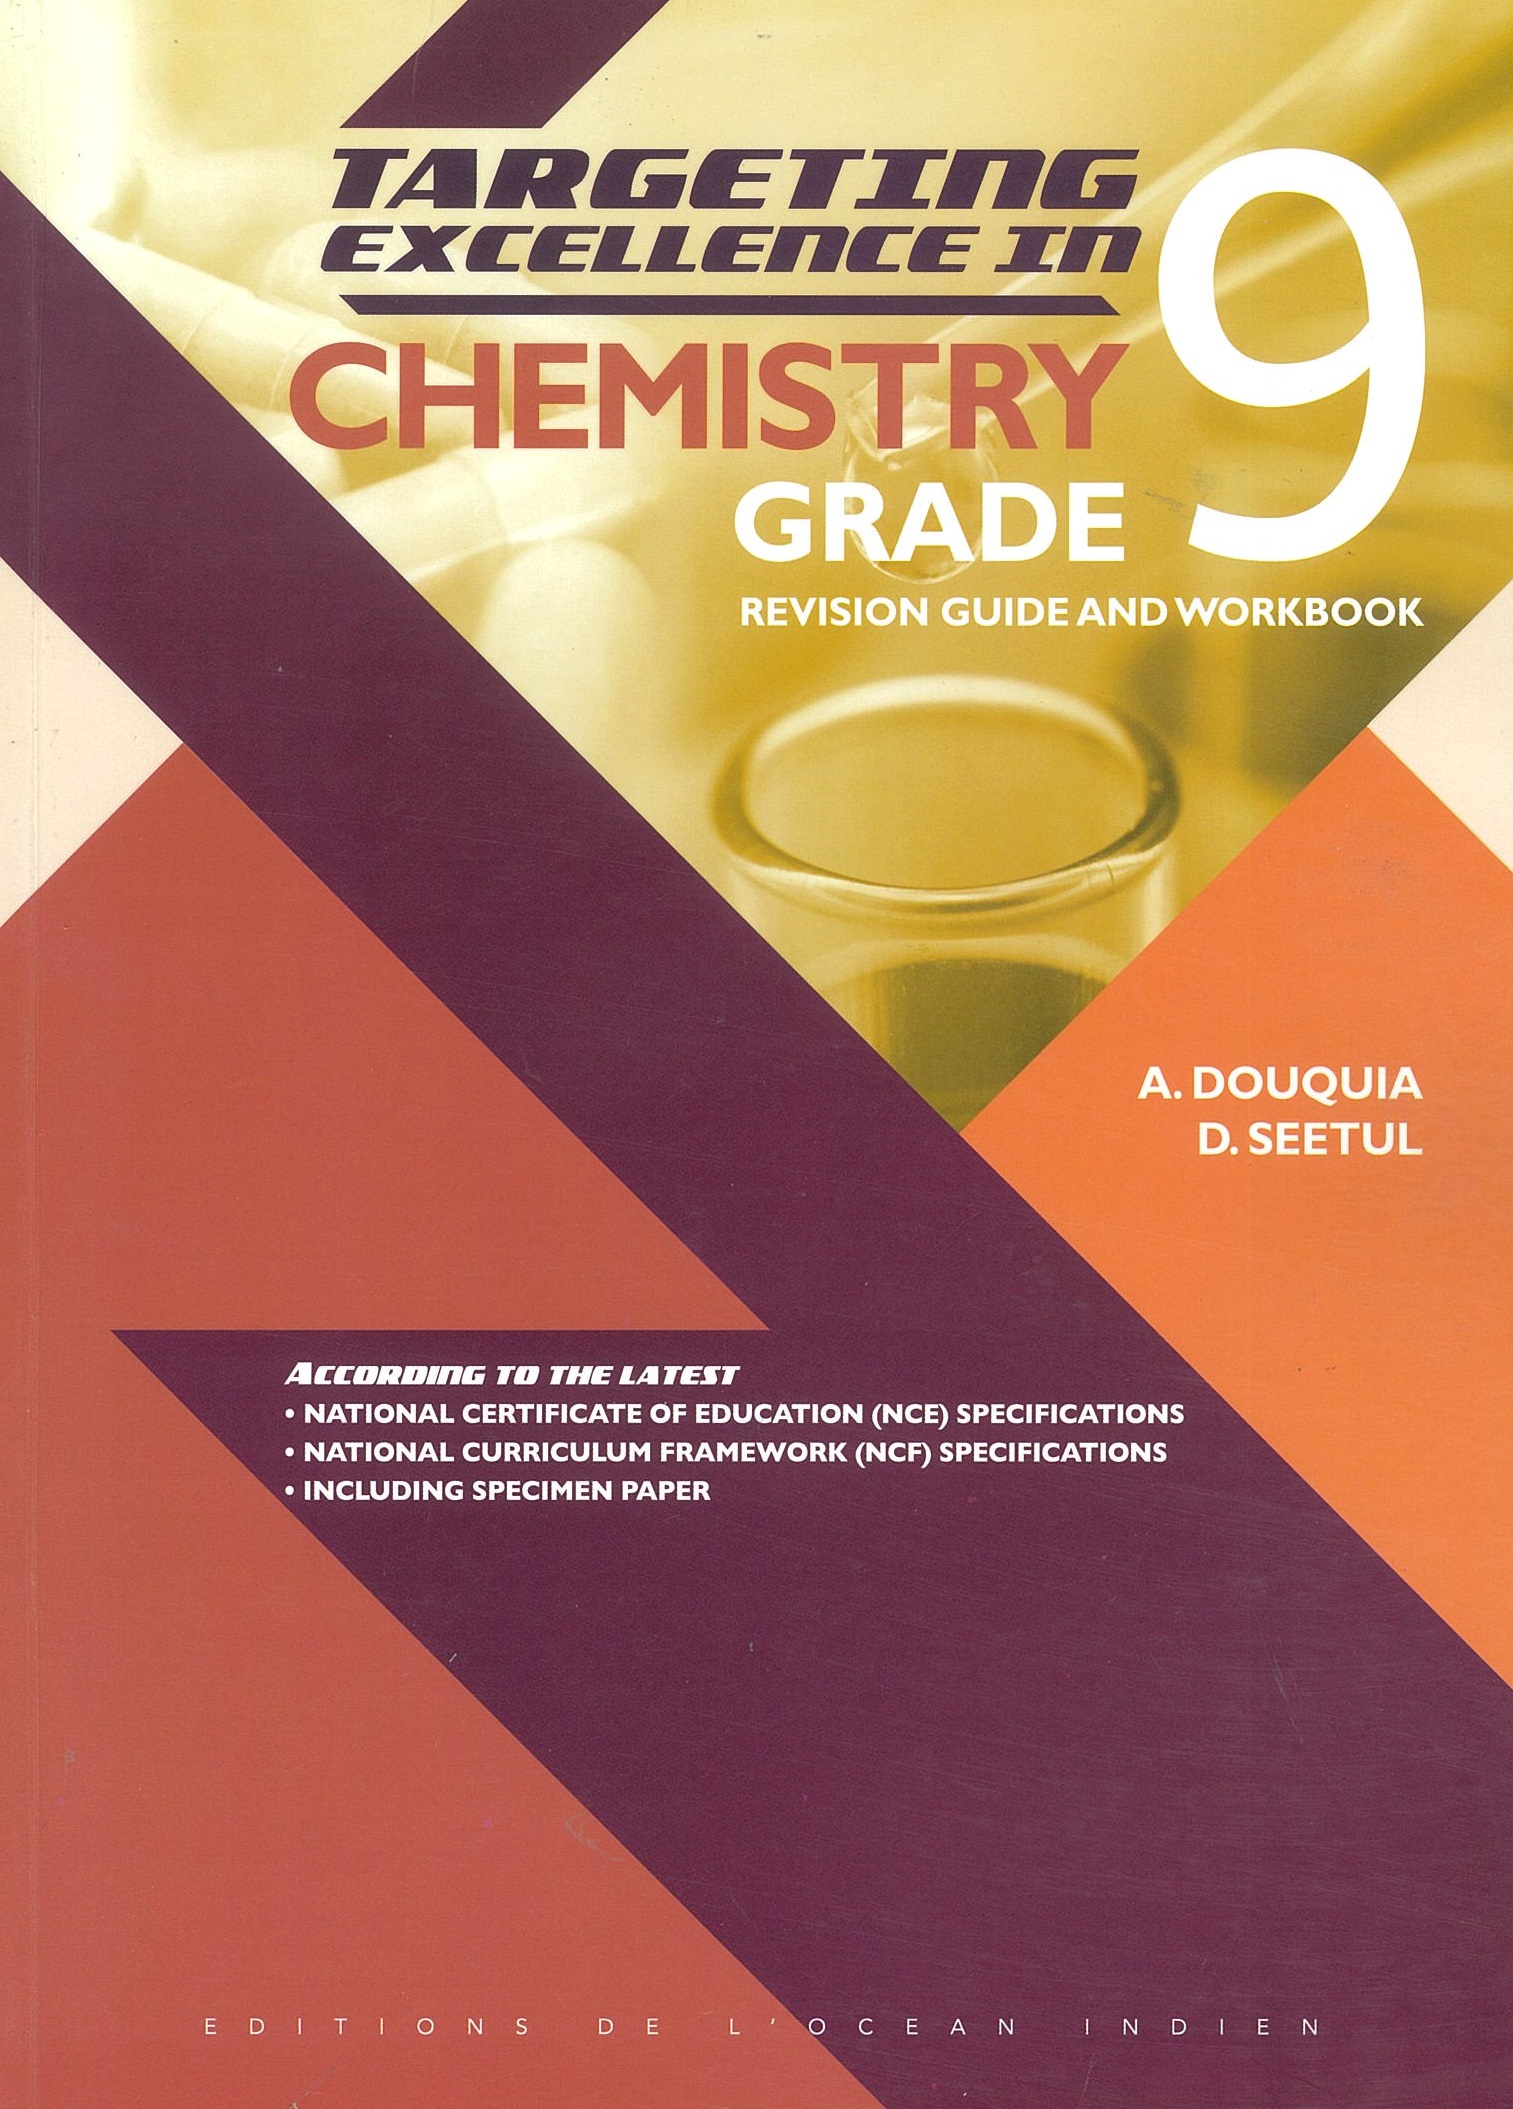 TARGETING EXCELLENCE IN CHEMISTRY GRADE 9 â€“  DOUQUIA & SEETUL